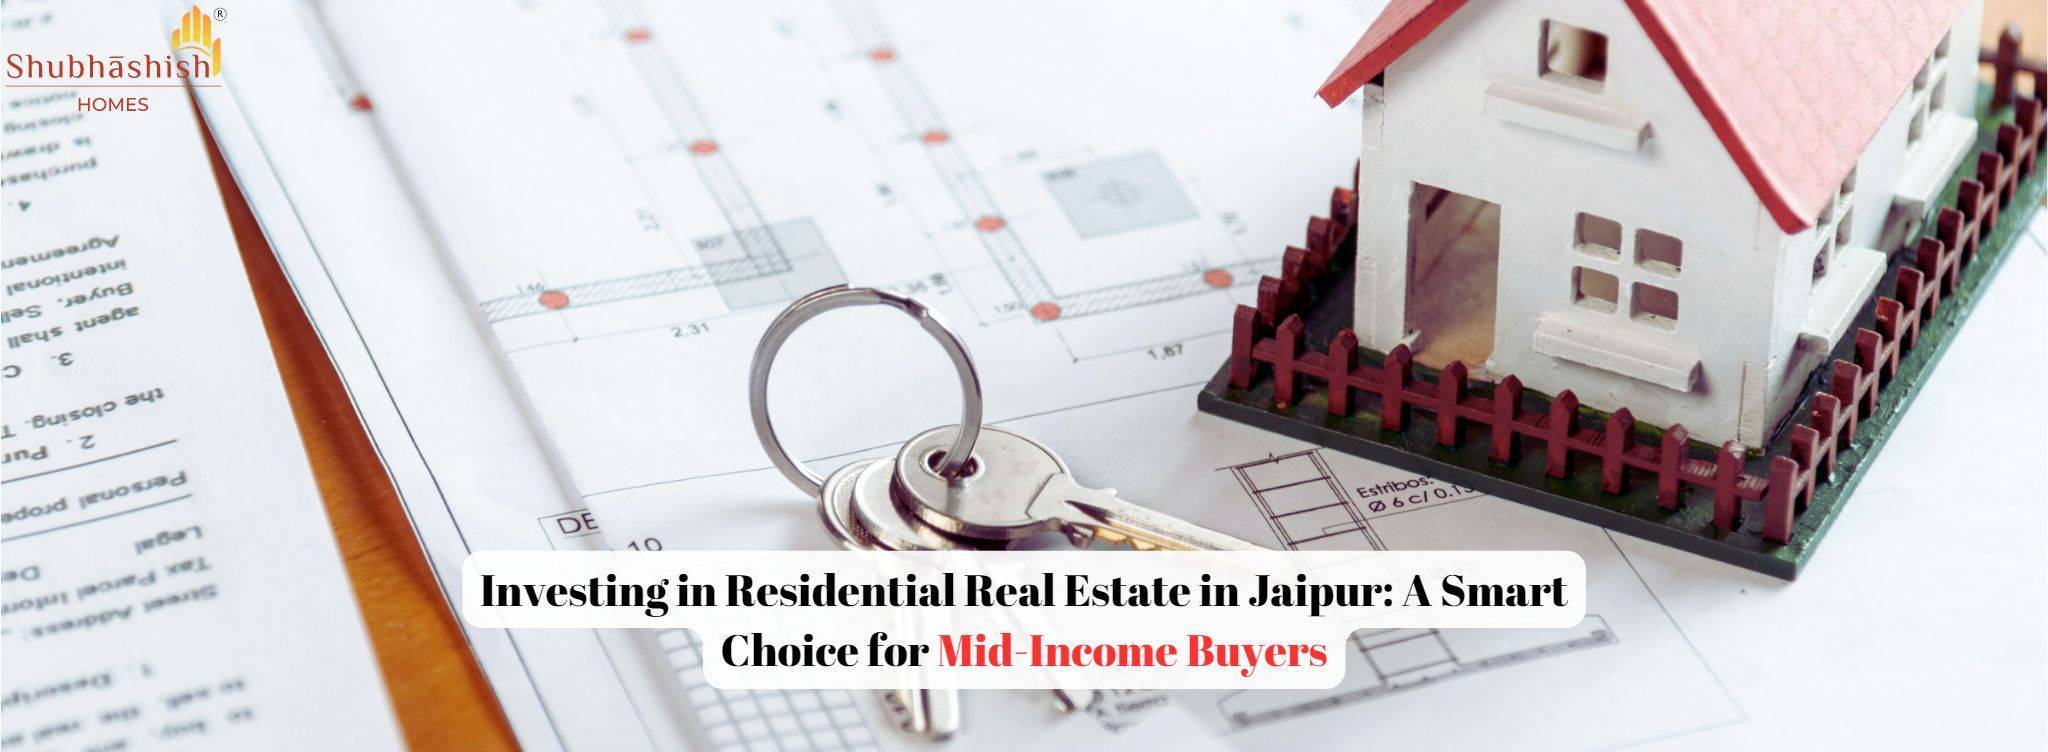 Investing in Residential Real Estate in Jaipur: A Smart Choice for Mid-Income Buyers